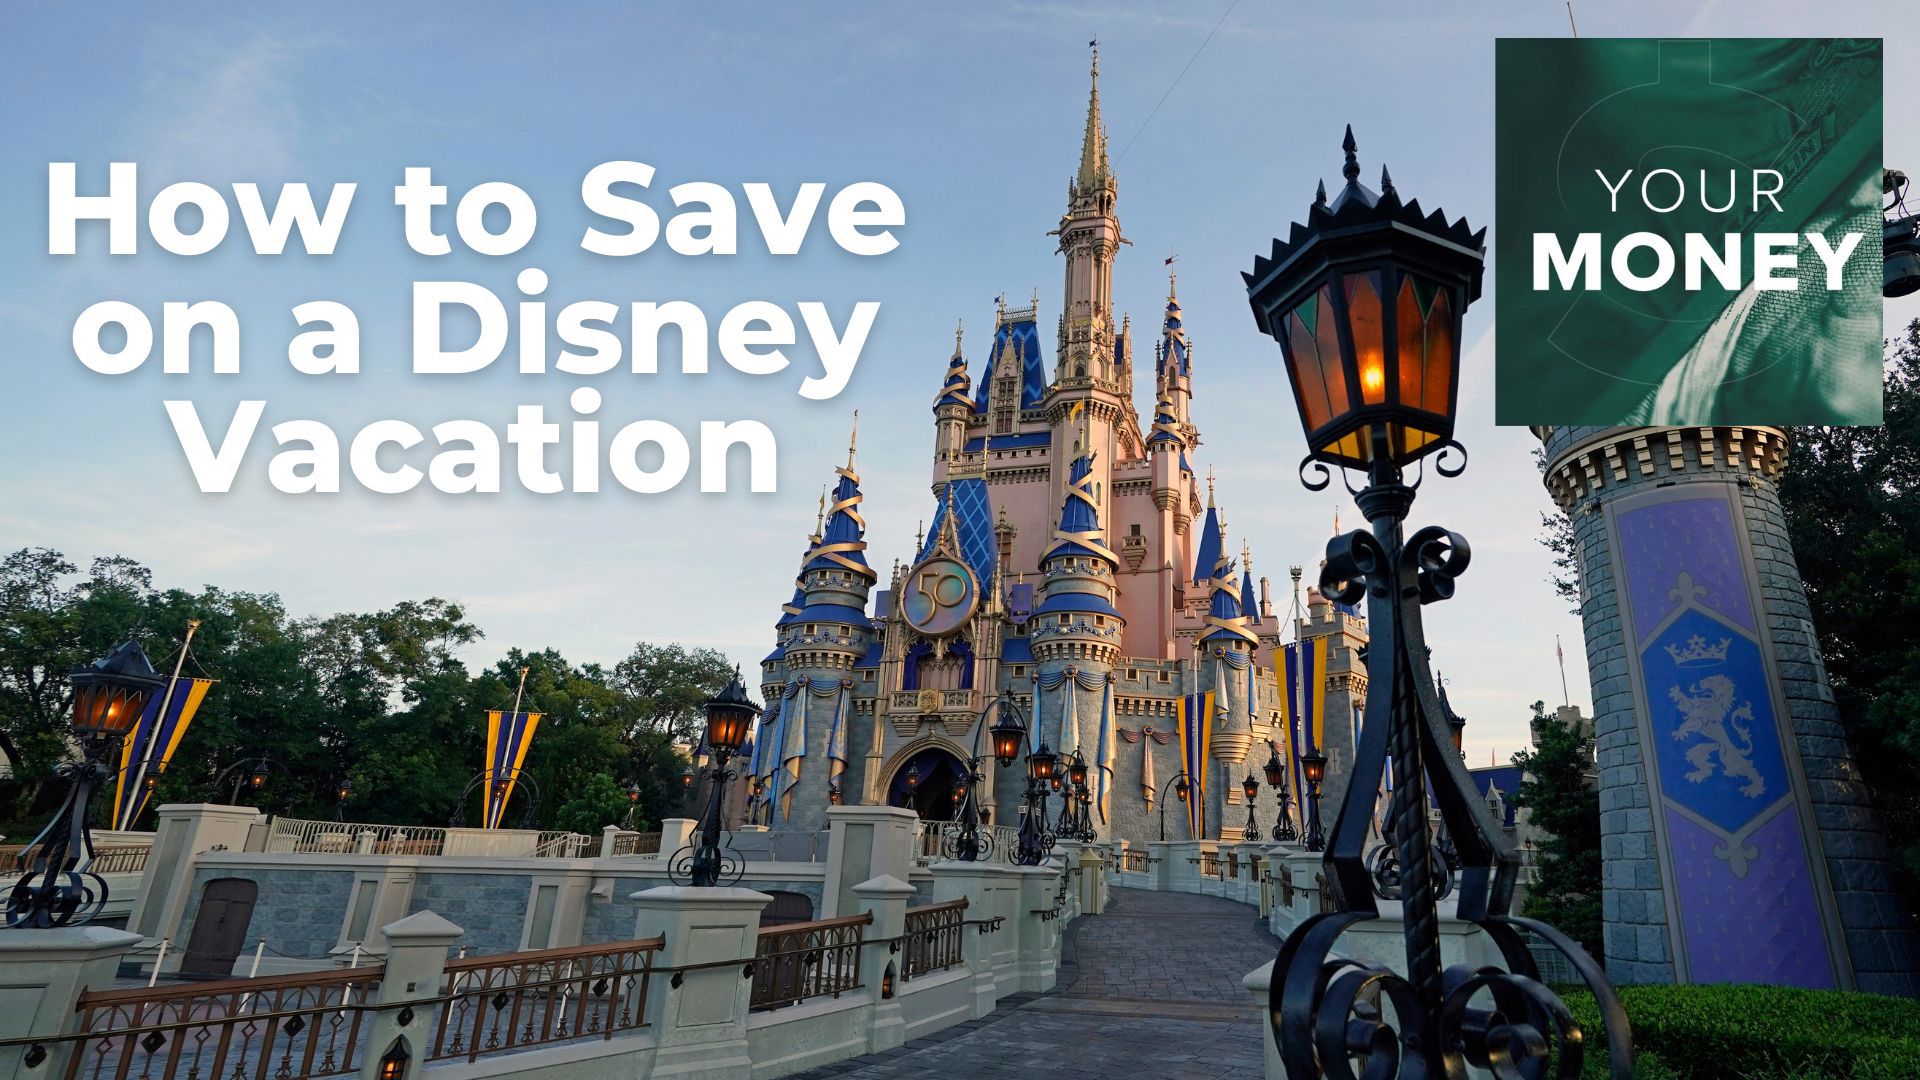 Gordon Severson talks with experts on how you can save on your next trip to Disney World or Disney Land from travel and hotel to Genie+ passes.